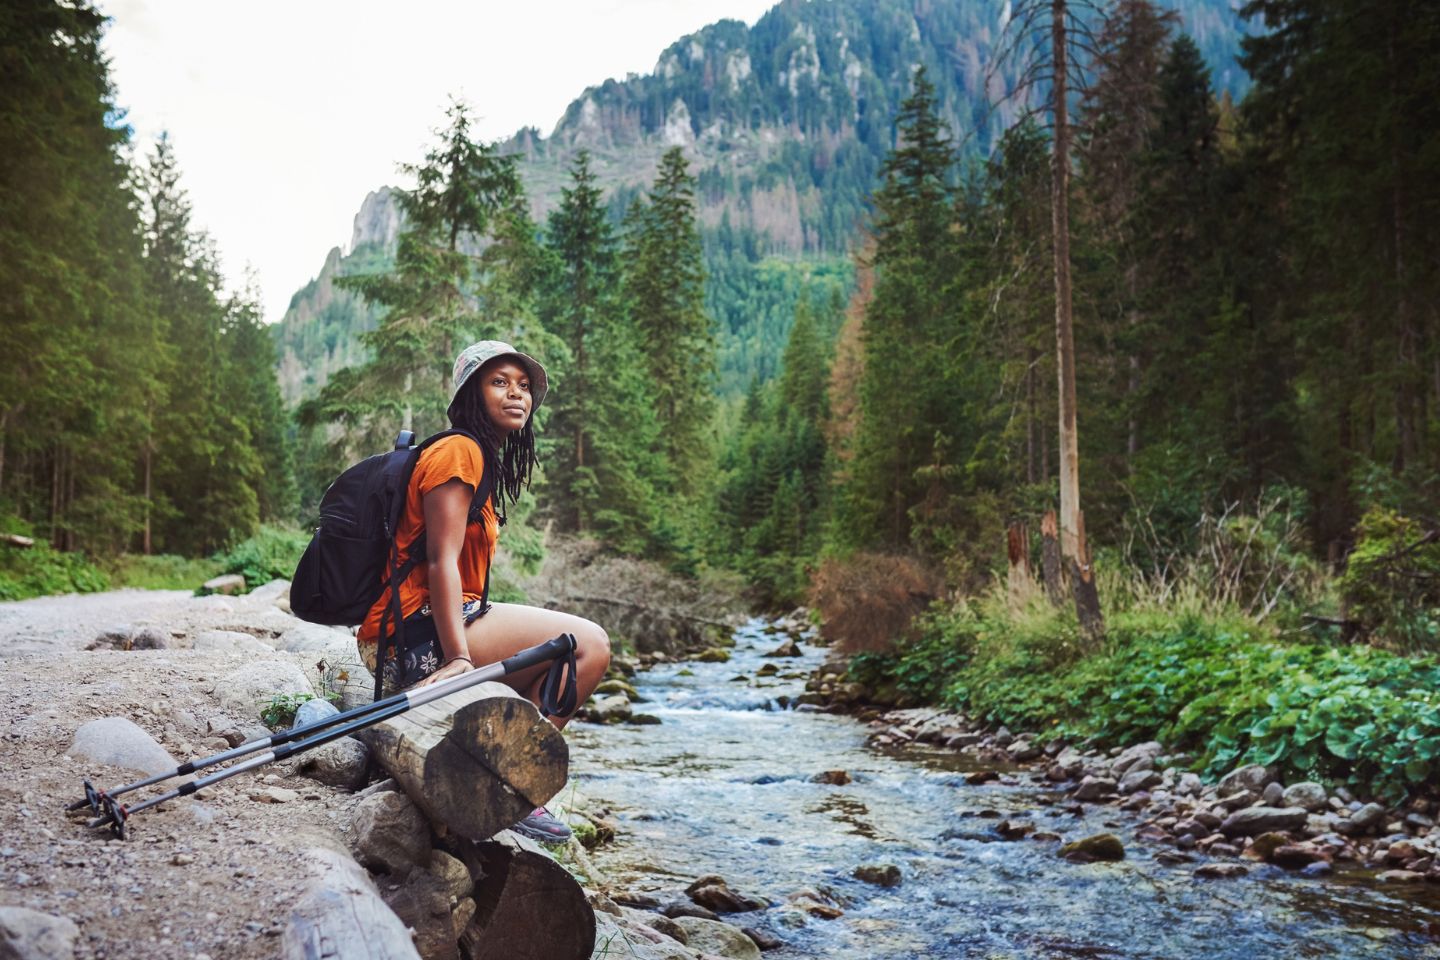 This App Helps Outdoor Travelers Stay Health Conscious While Exploring Nature